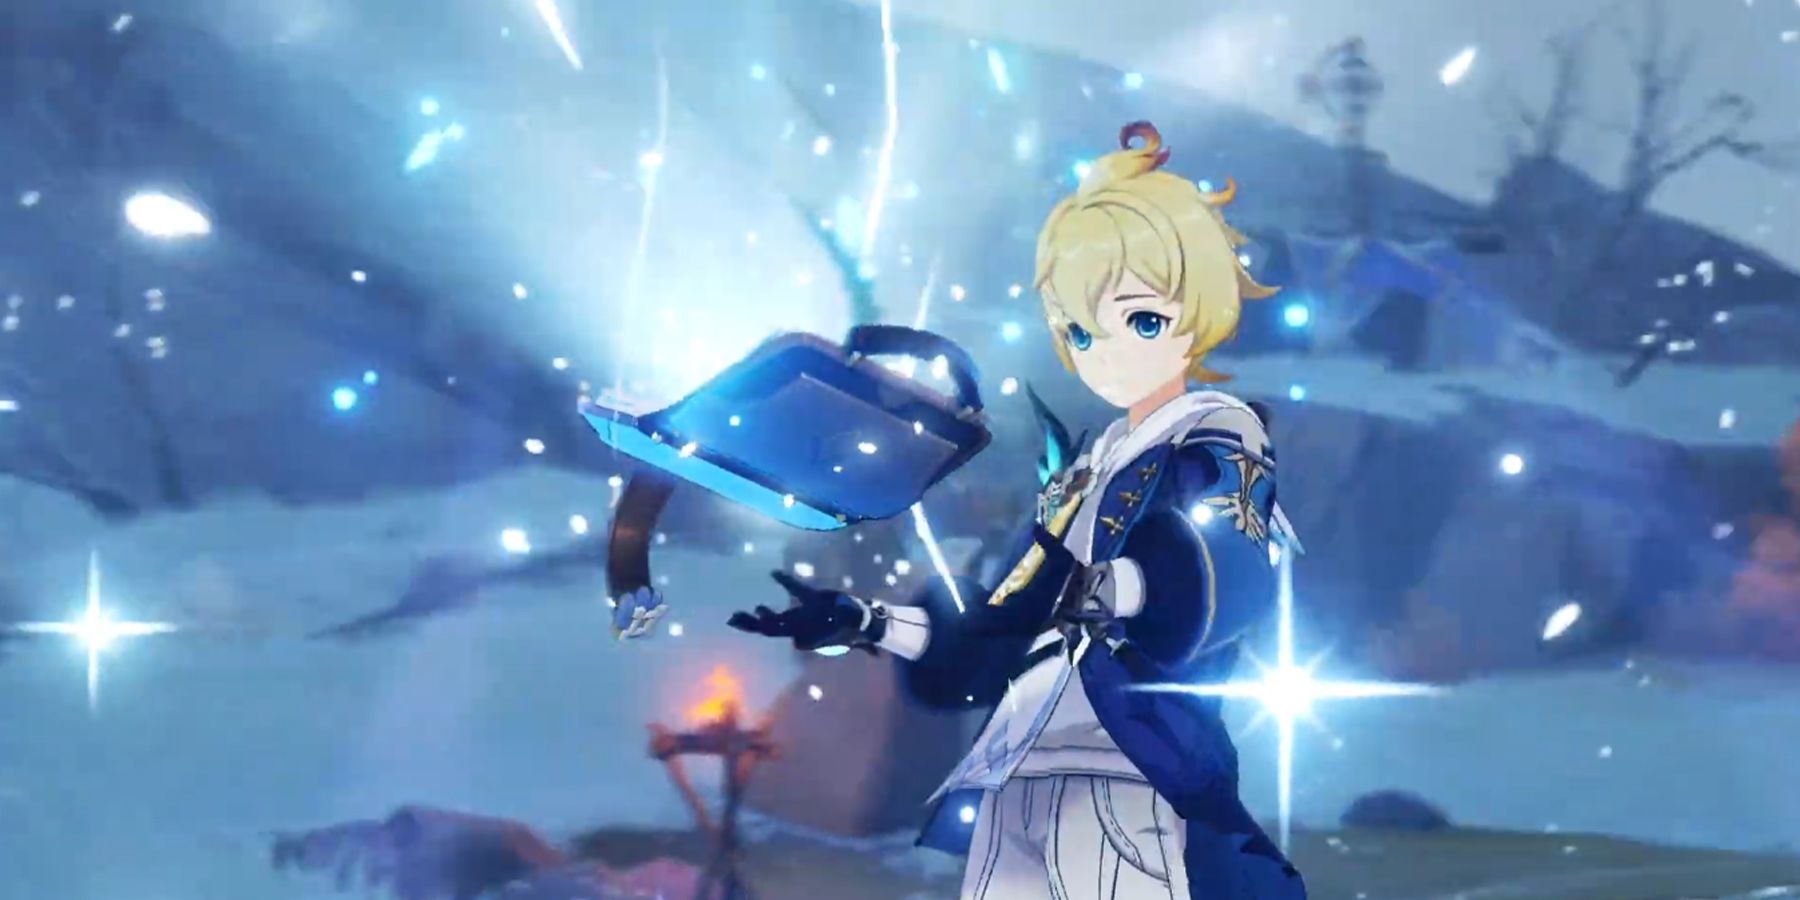 mika holding a book in genshin impact